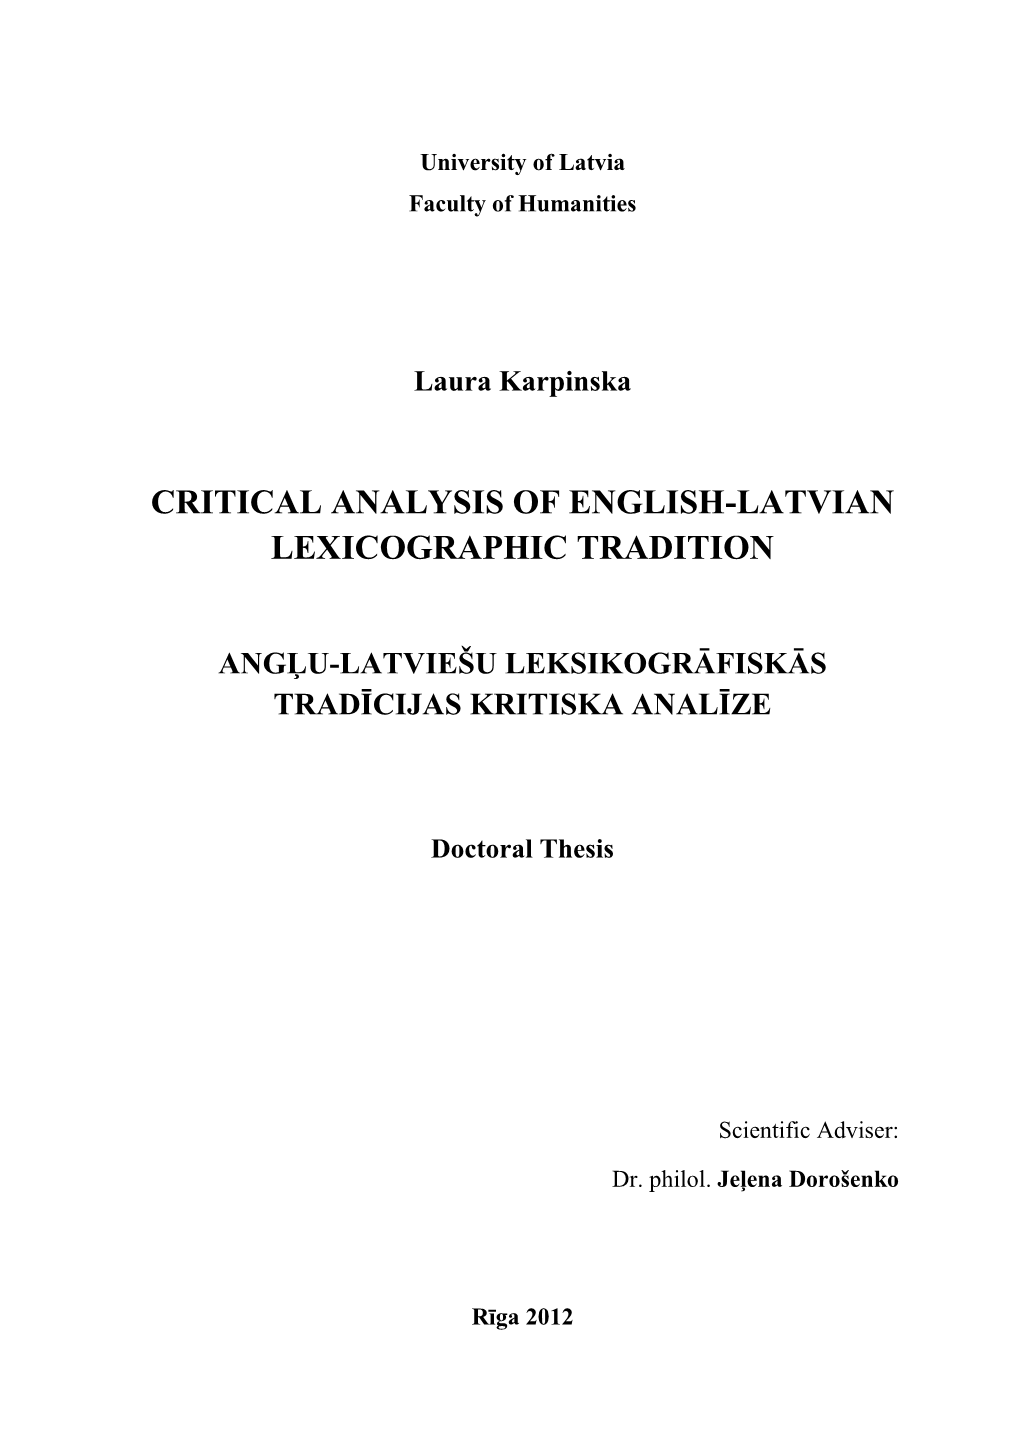 Critical Analysis of English-Latvian Lexicographic Tradition